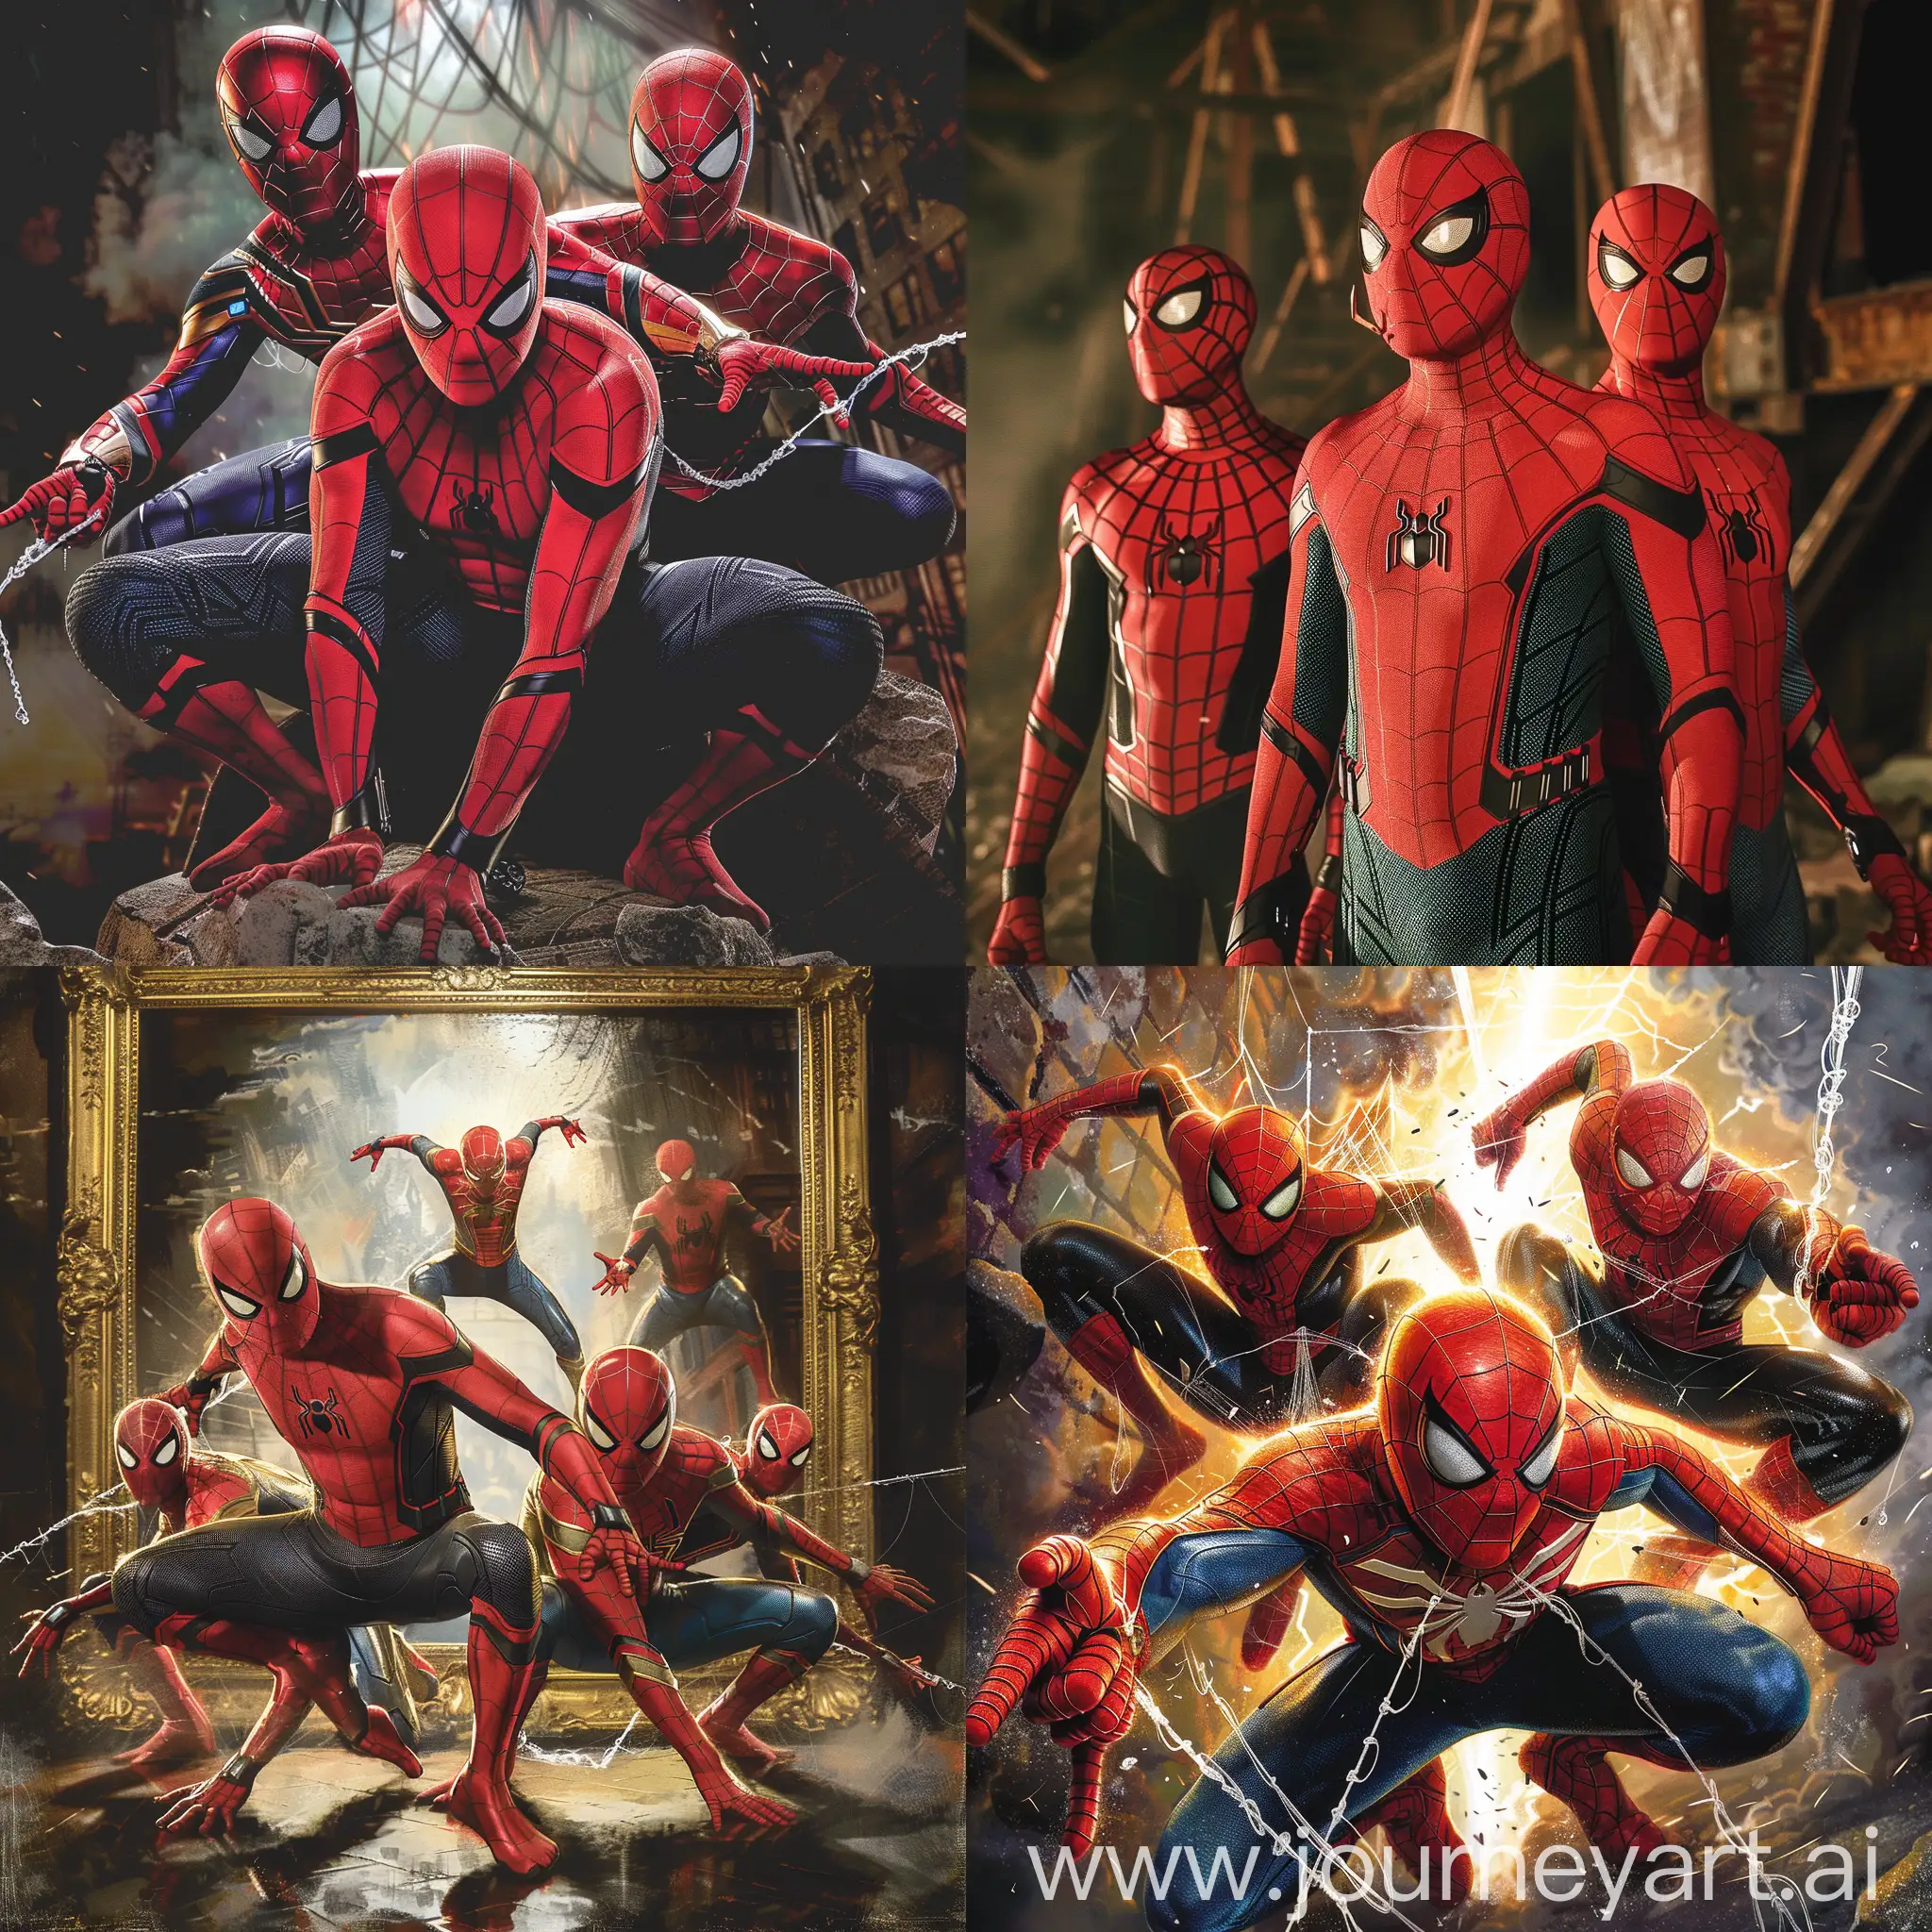 Three-SpiderMen-Unite-in-Epic-Frame-from-SpiderMan-No-Way-Home